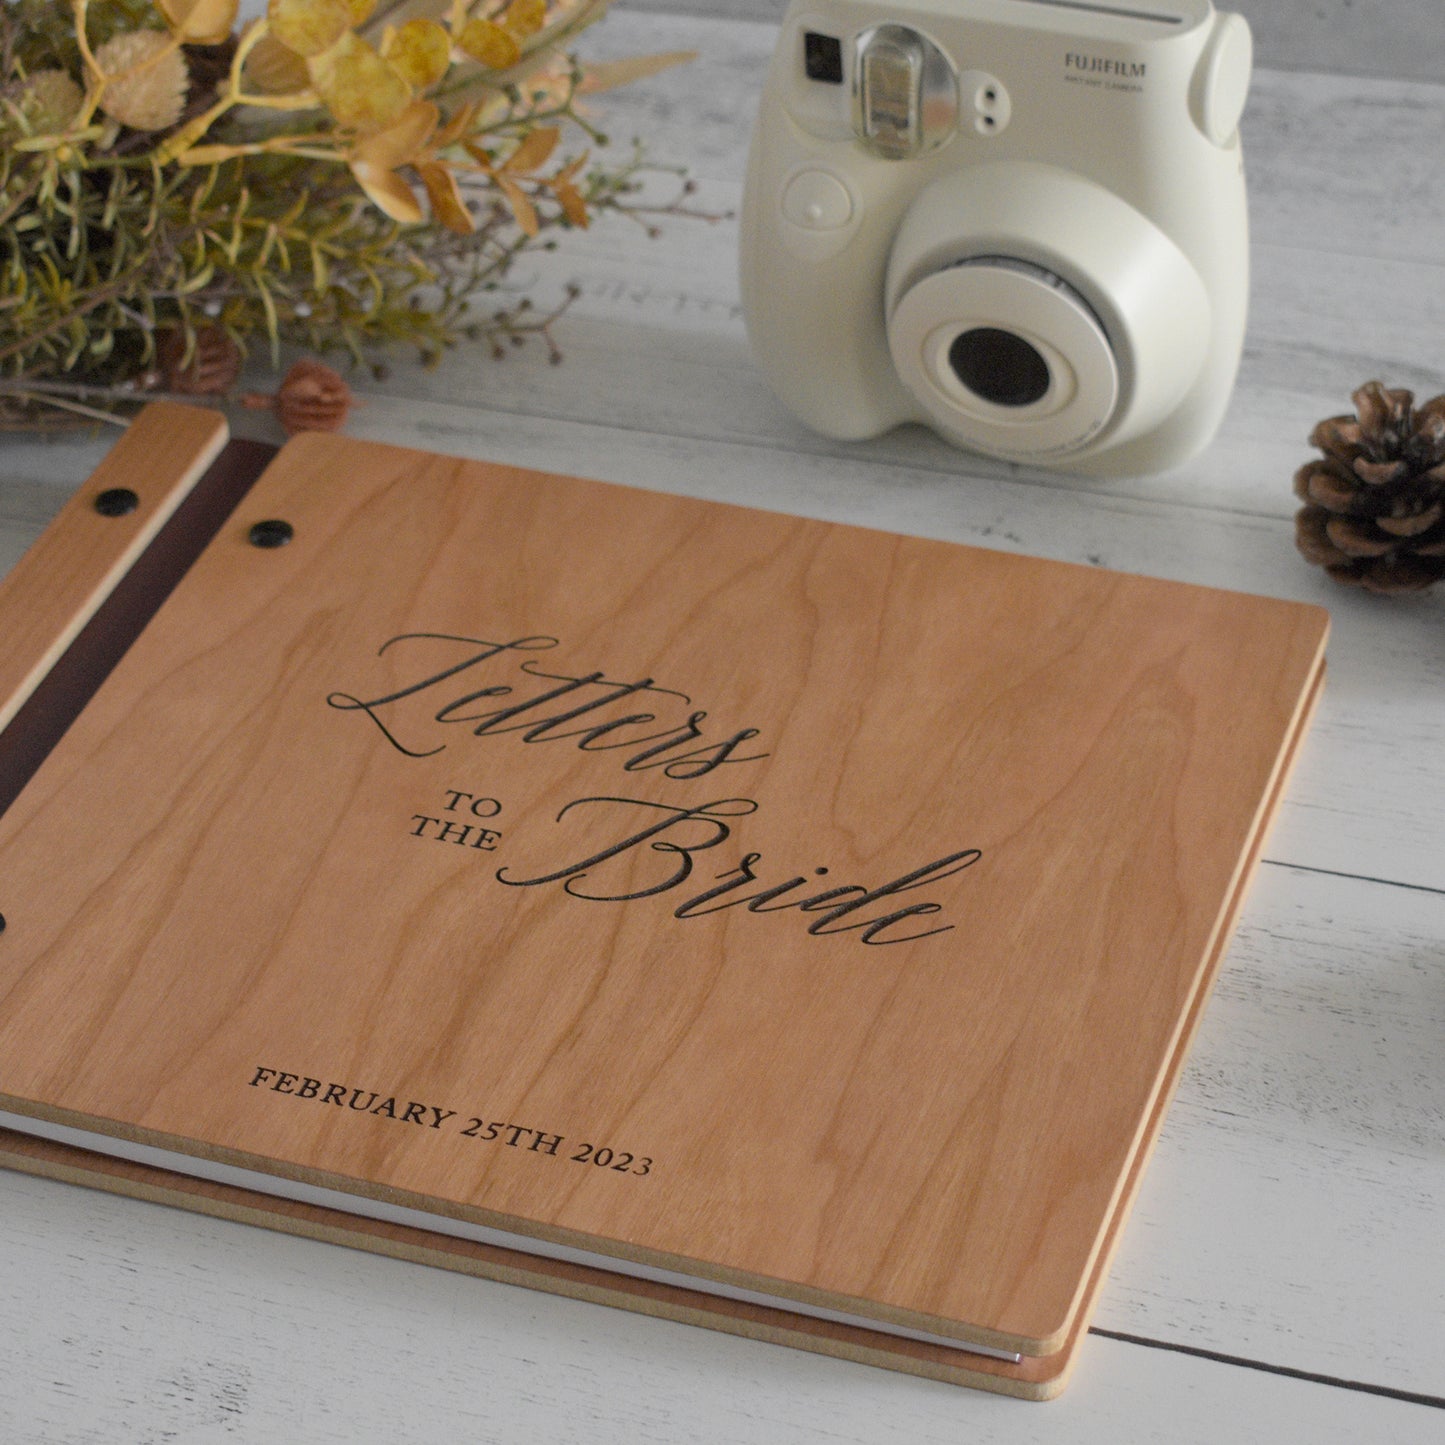 An 8.5x11" guest book lies on a table. Made of cherry wood, black vegan leather binding, and black hardware. The front cover includes an engraved design with personalization.